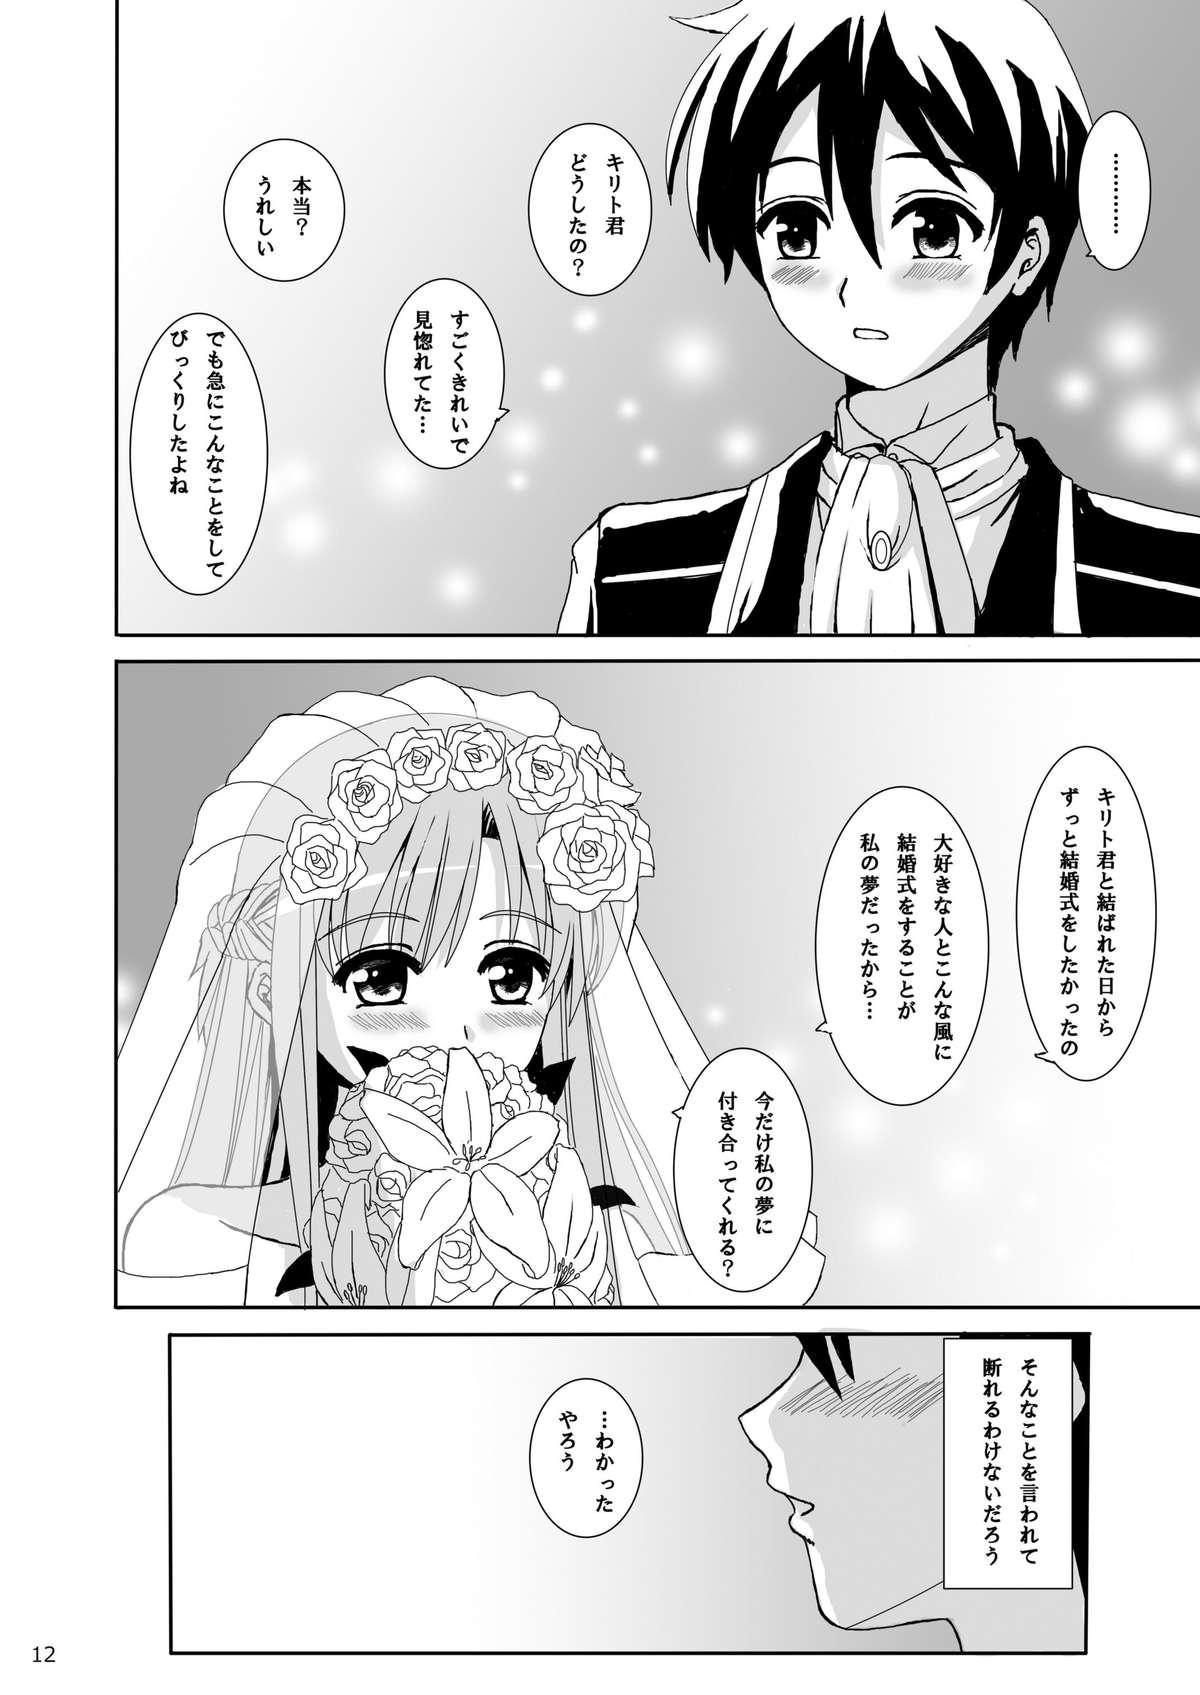 Oiled WEDDING BELL - Sword art online Tributo - Page 12